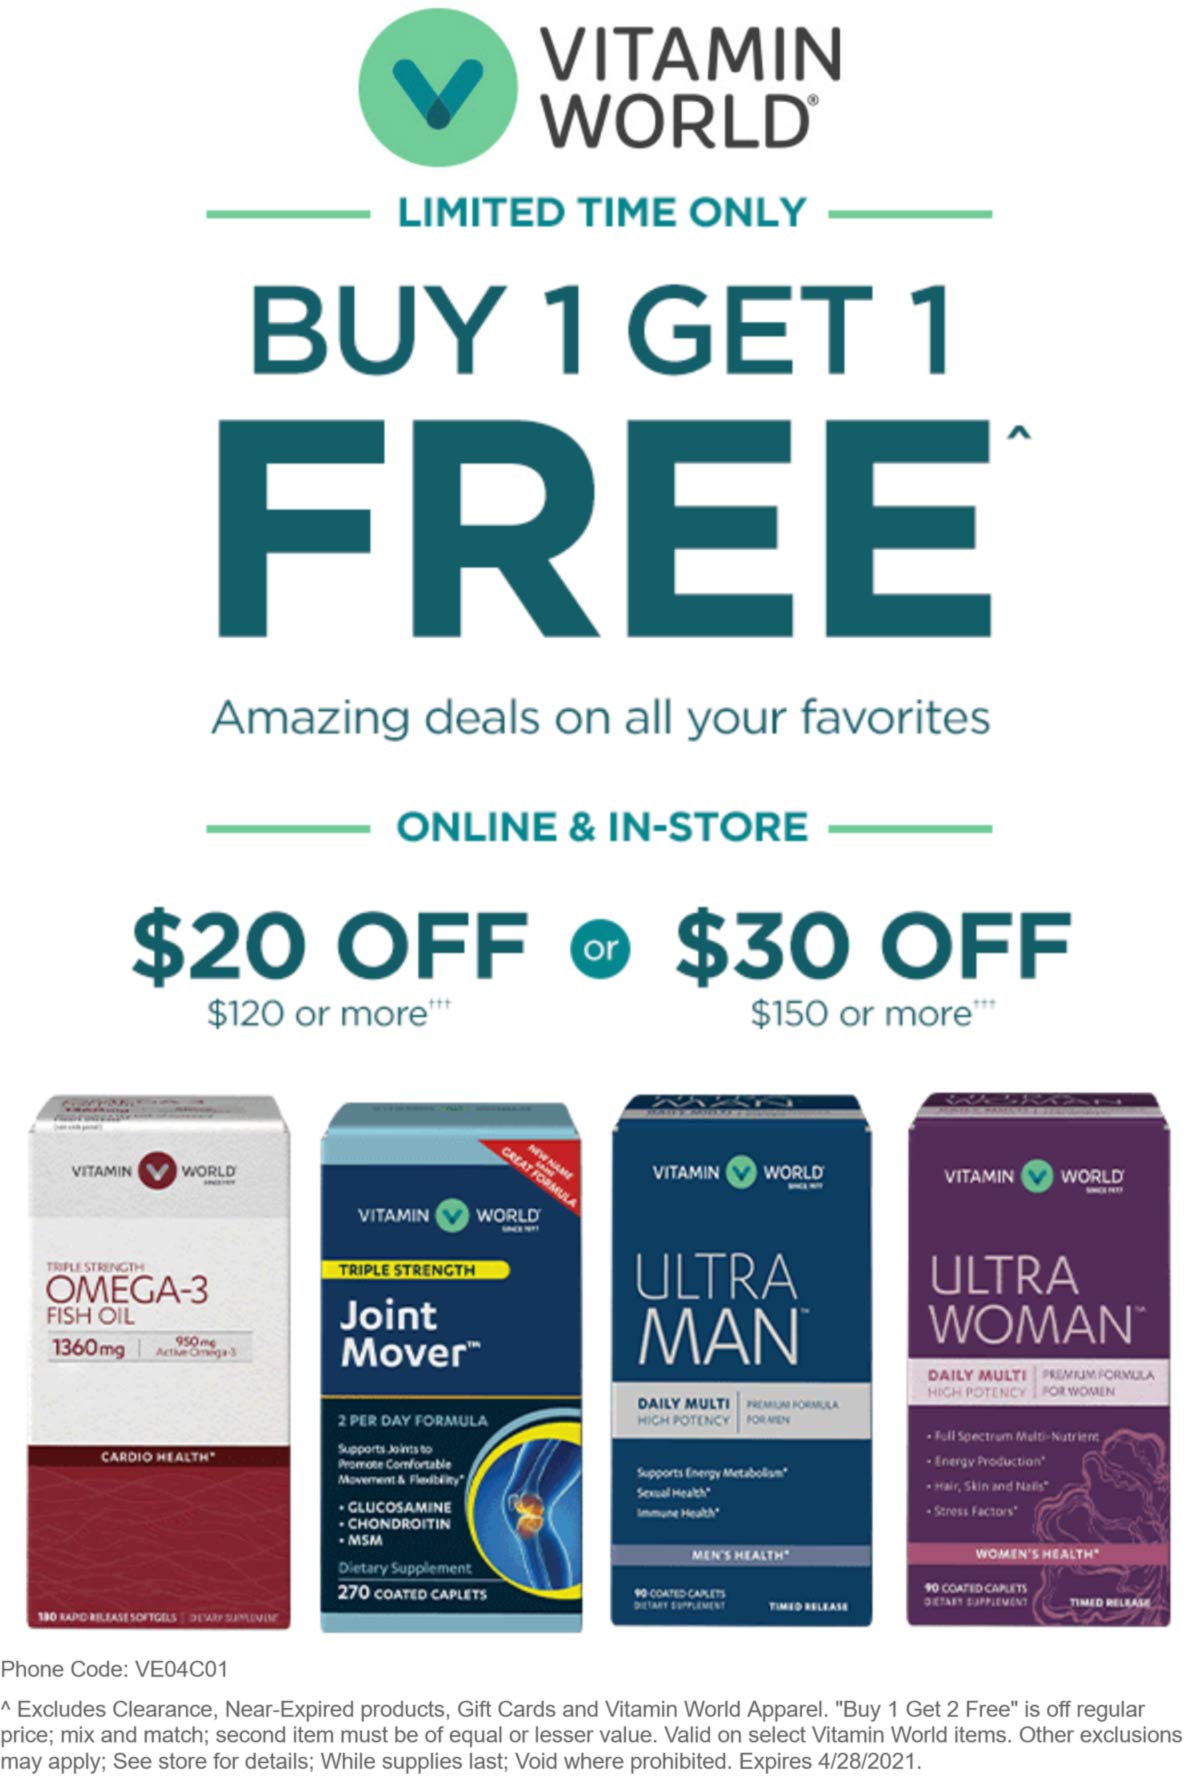 Vitamin World stores Coupon  Second item free + $20 off $120 & more at Vitamin World, or online via promo code VE04C01 #vitaminworld 